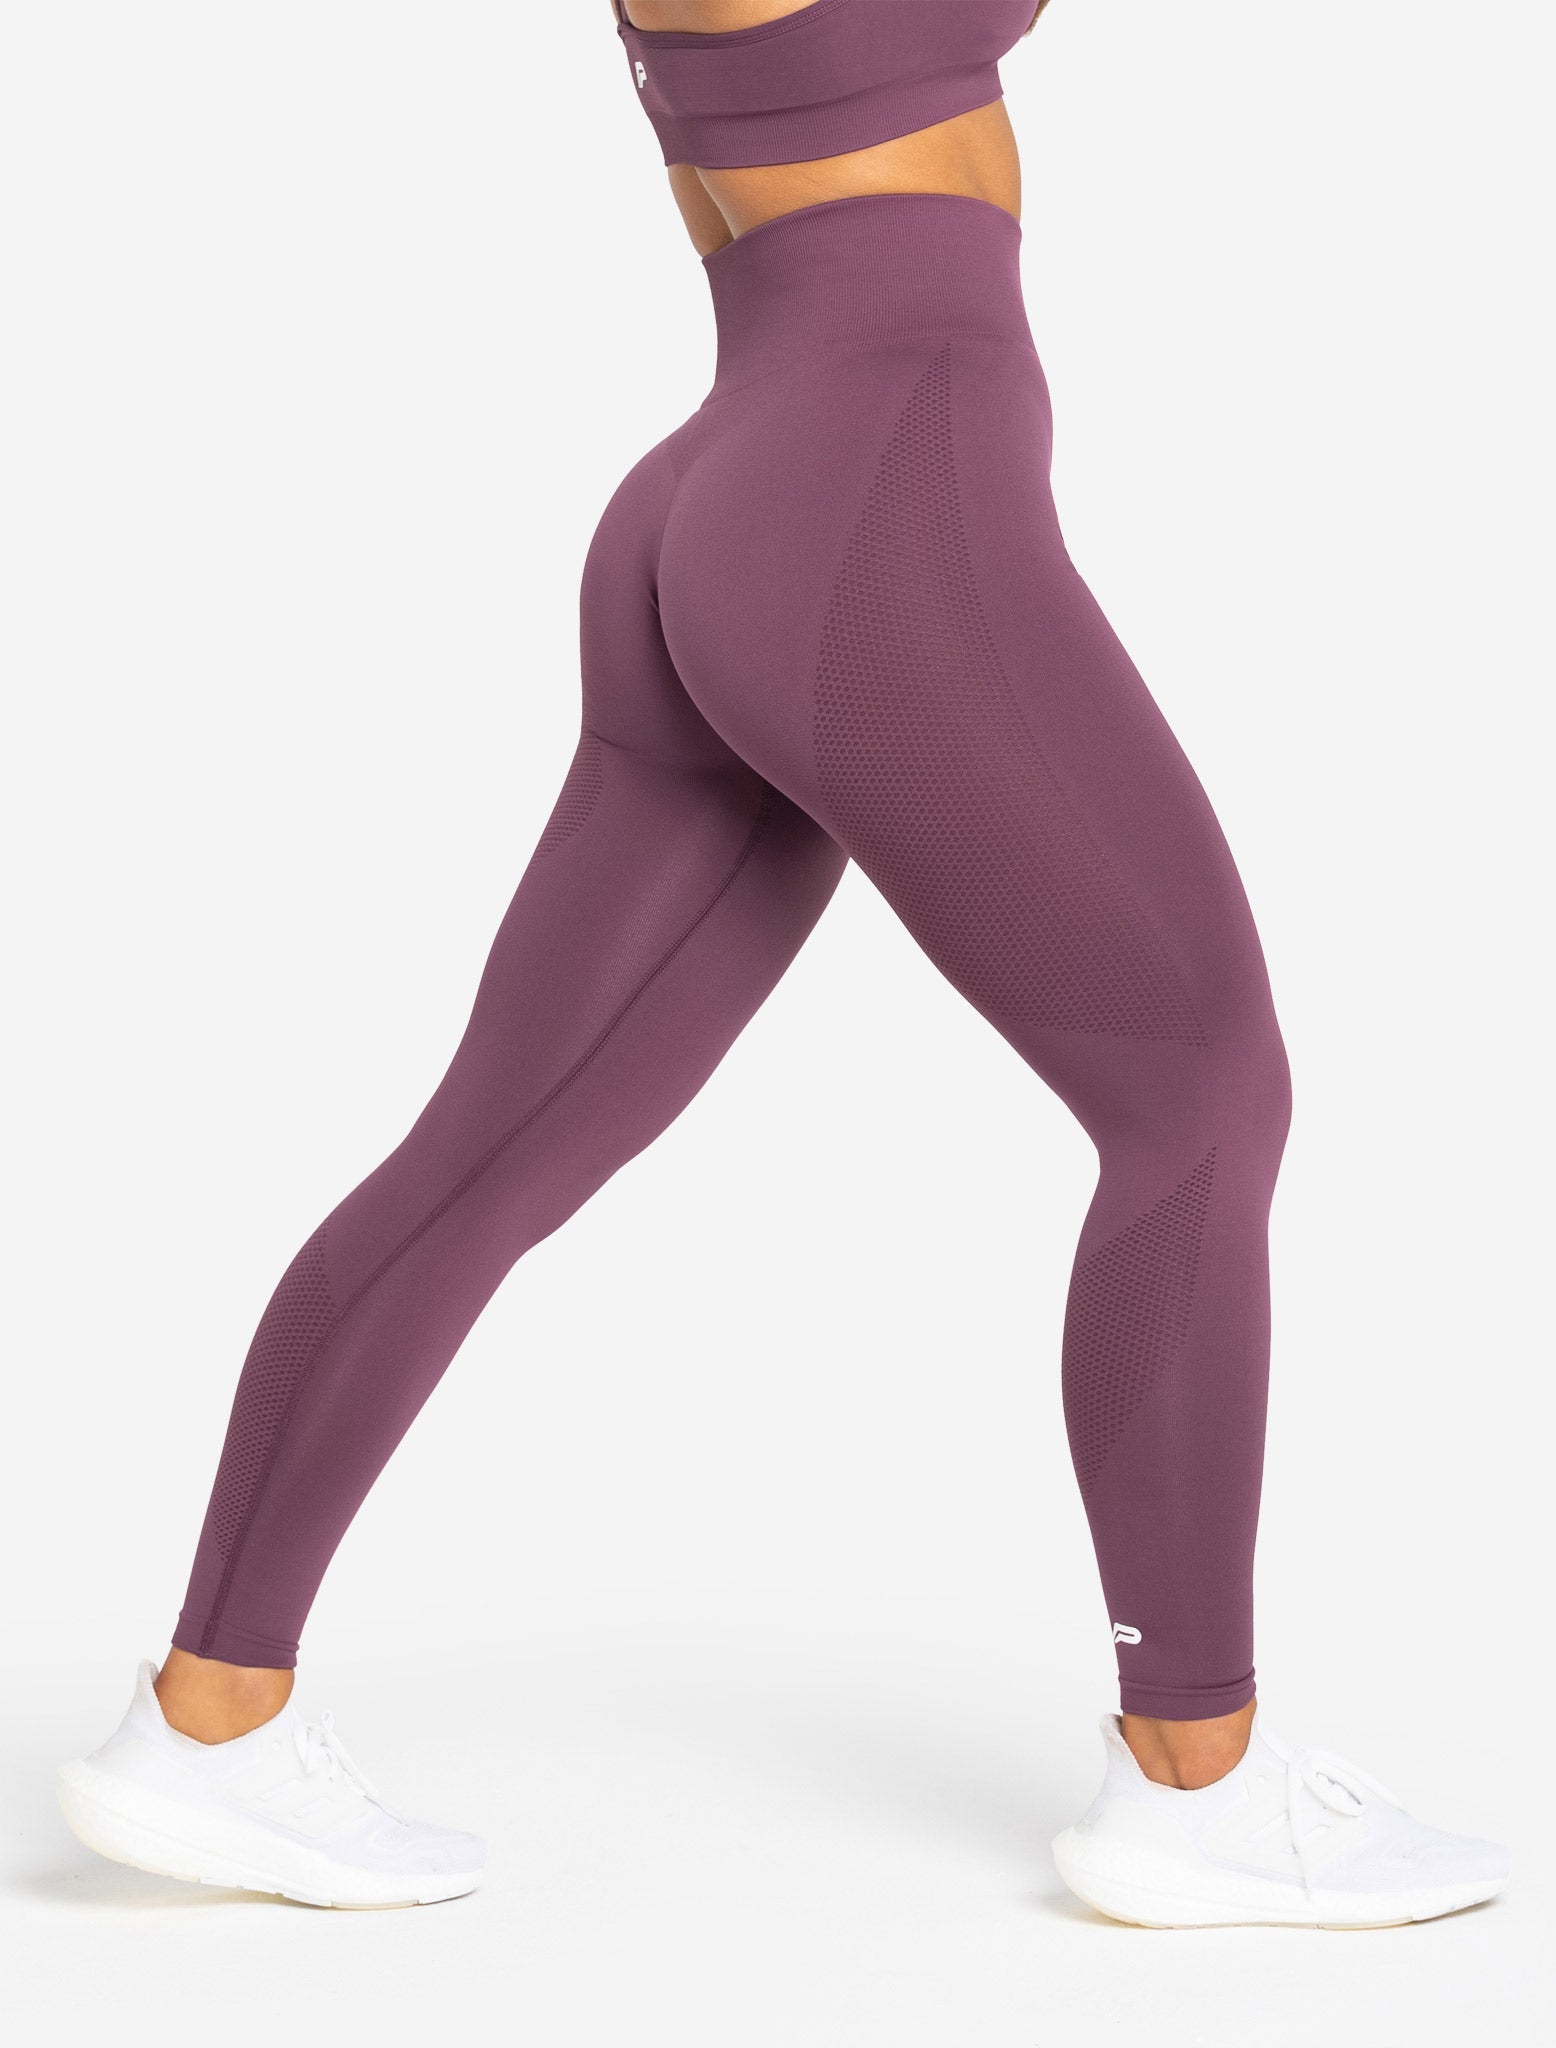 HIIT Seamless crinkle long sleeve crop top and highwaisted legging in lilac